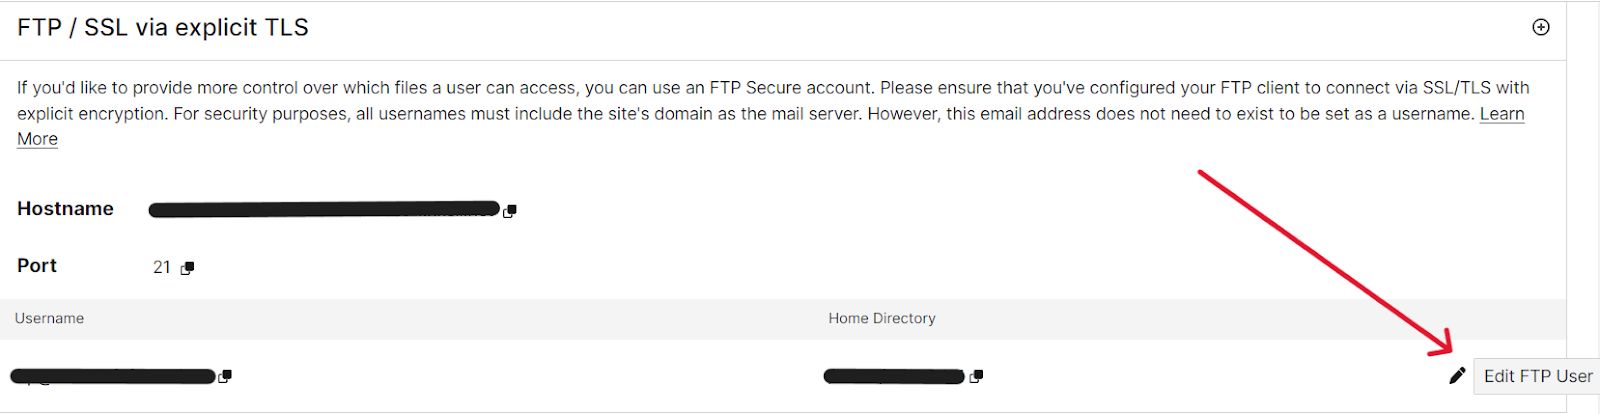 The red arrow indicates where to find the Edit FTP User button.